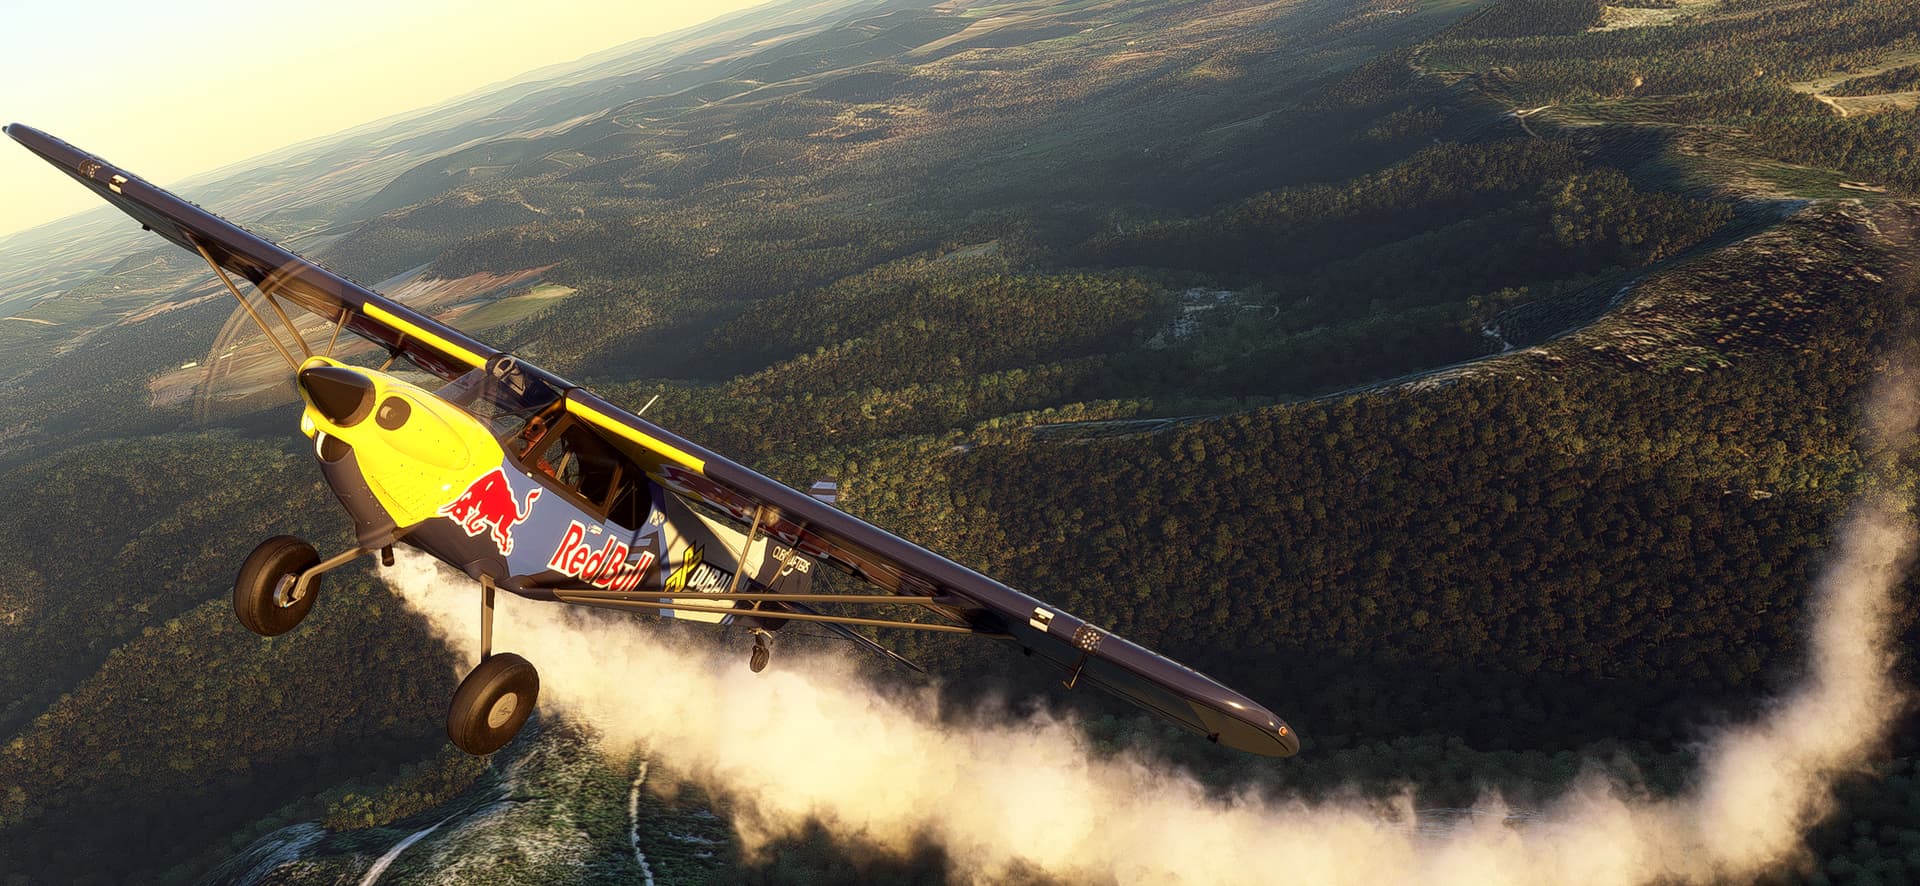 The Red Bull Carbon Cub pulls up away from terrain below with white smoke forming behind it.